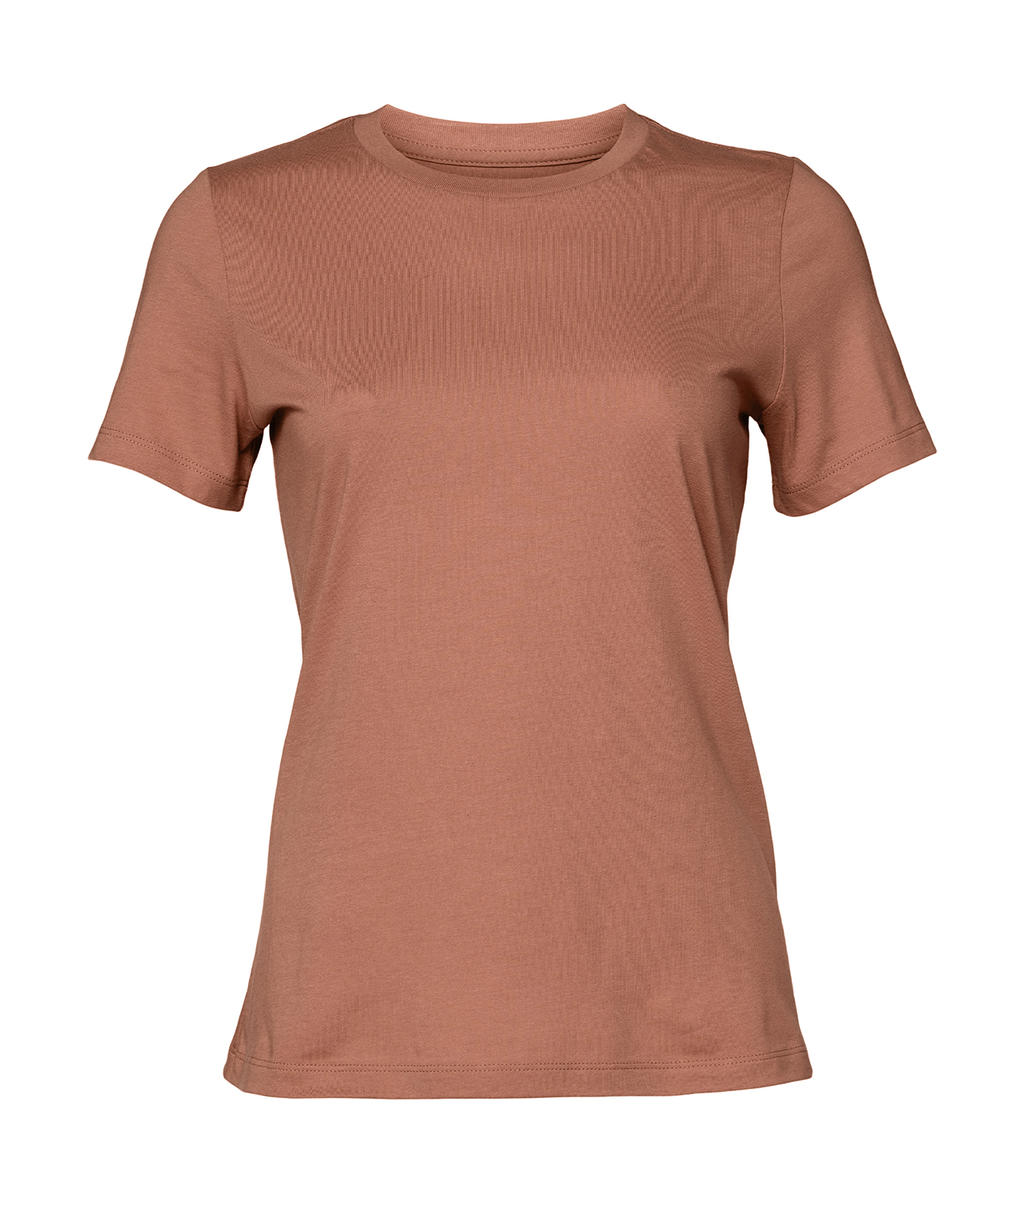  Womens Relaxed Jersey Short Sleeve Tee in Farbe Terracotta